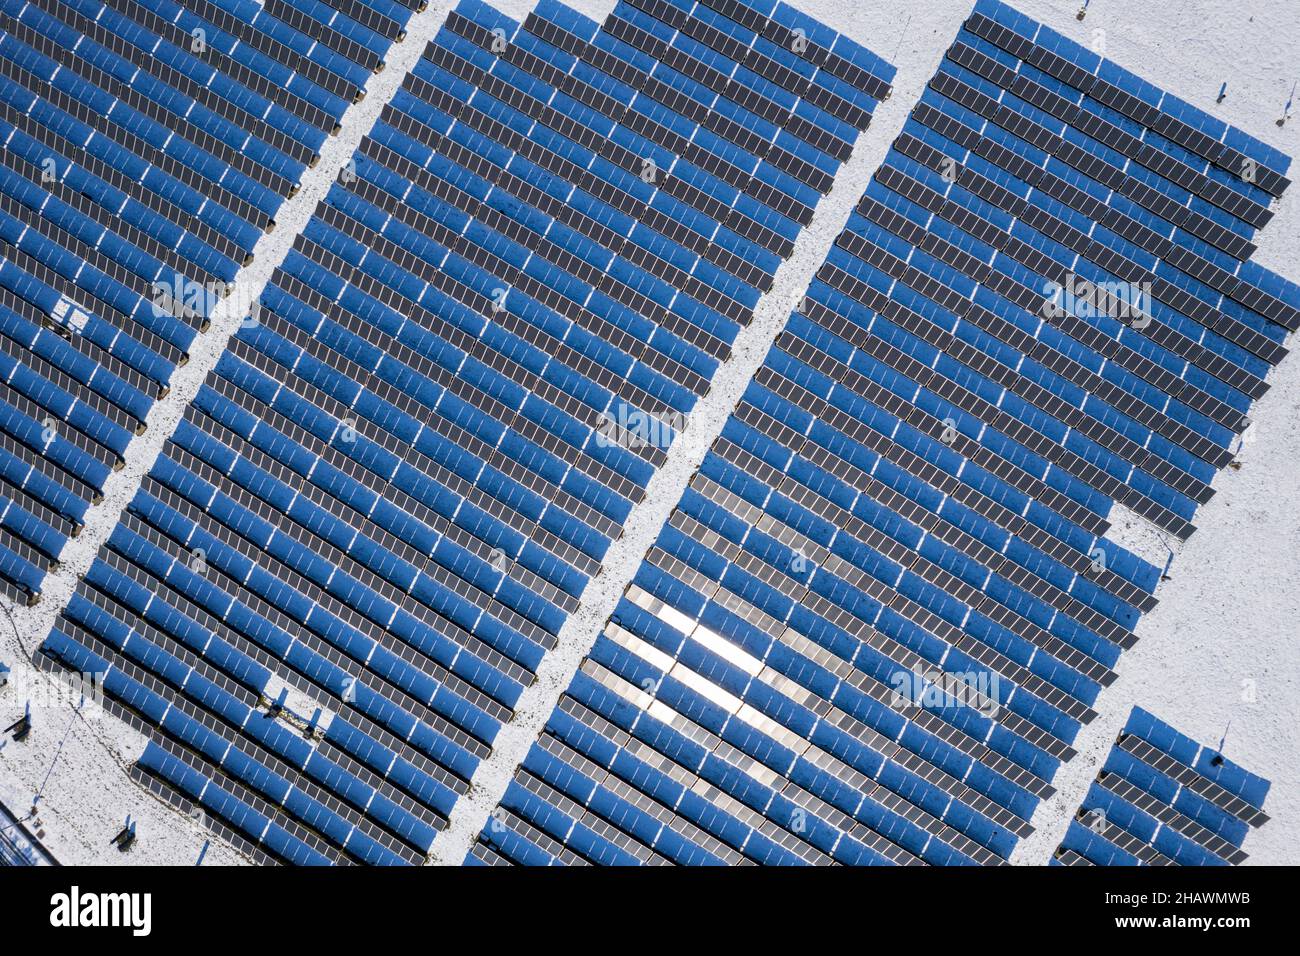 Aerial view of solar panels on a sunny winter day Stock Photo